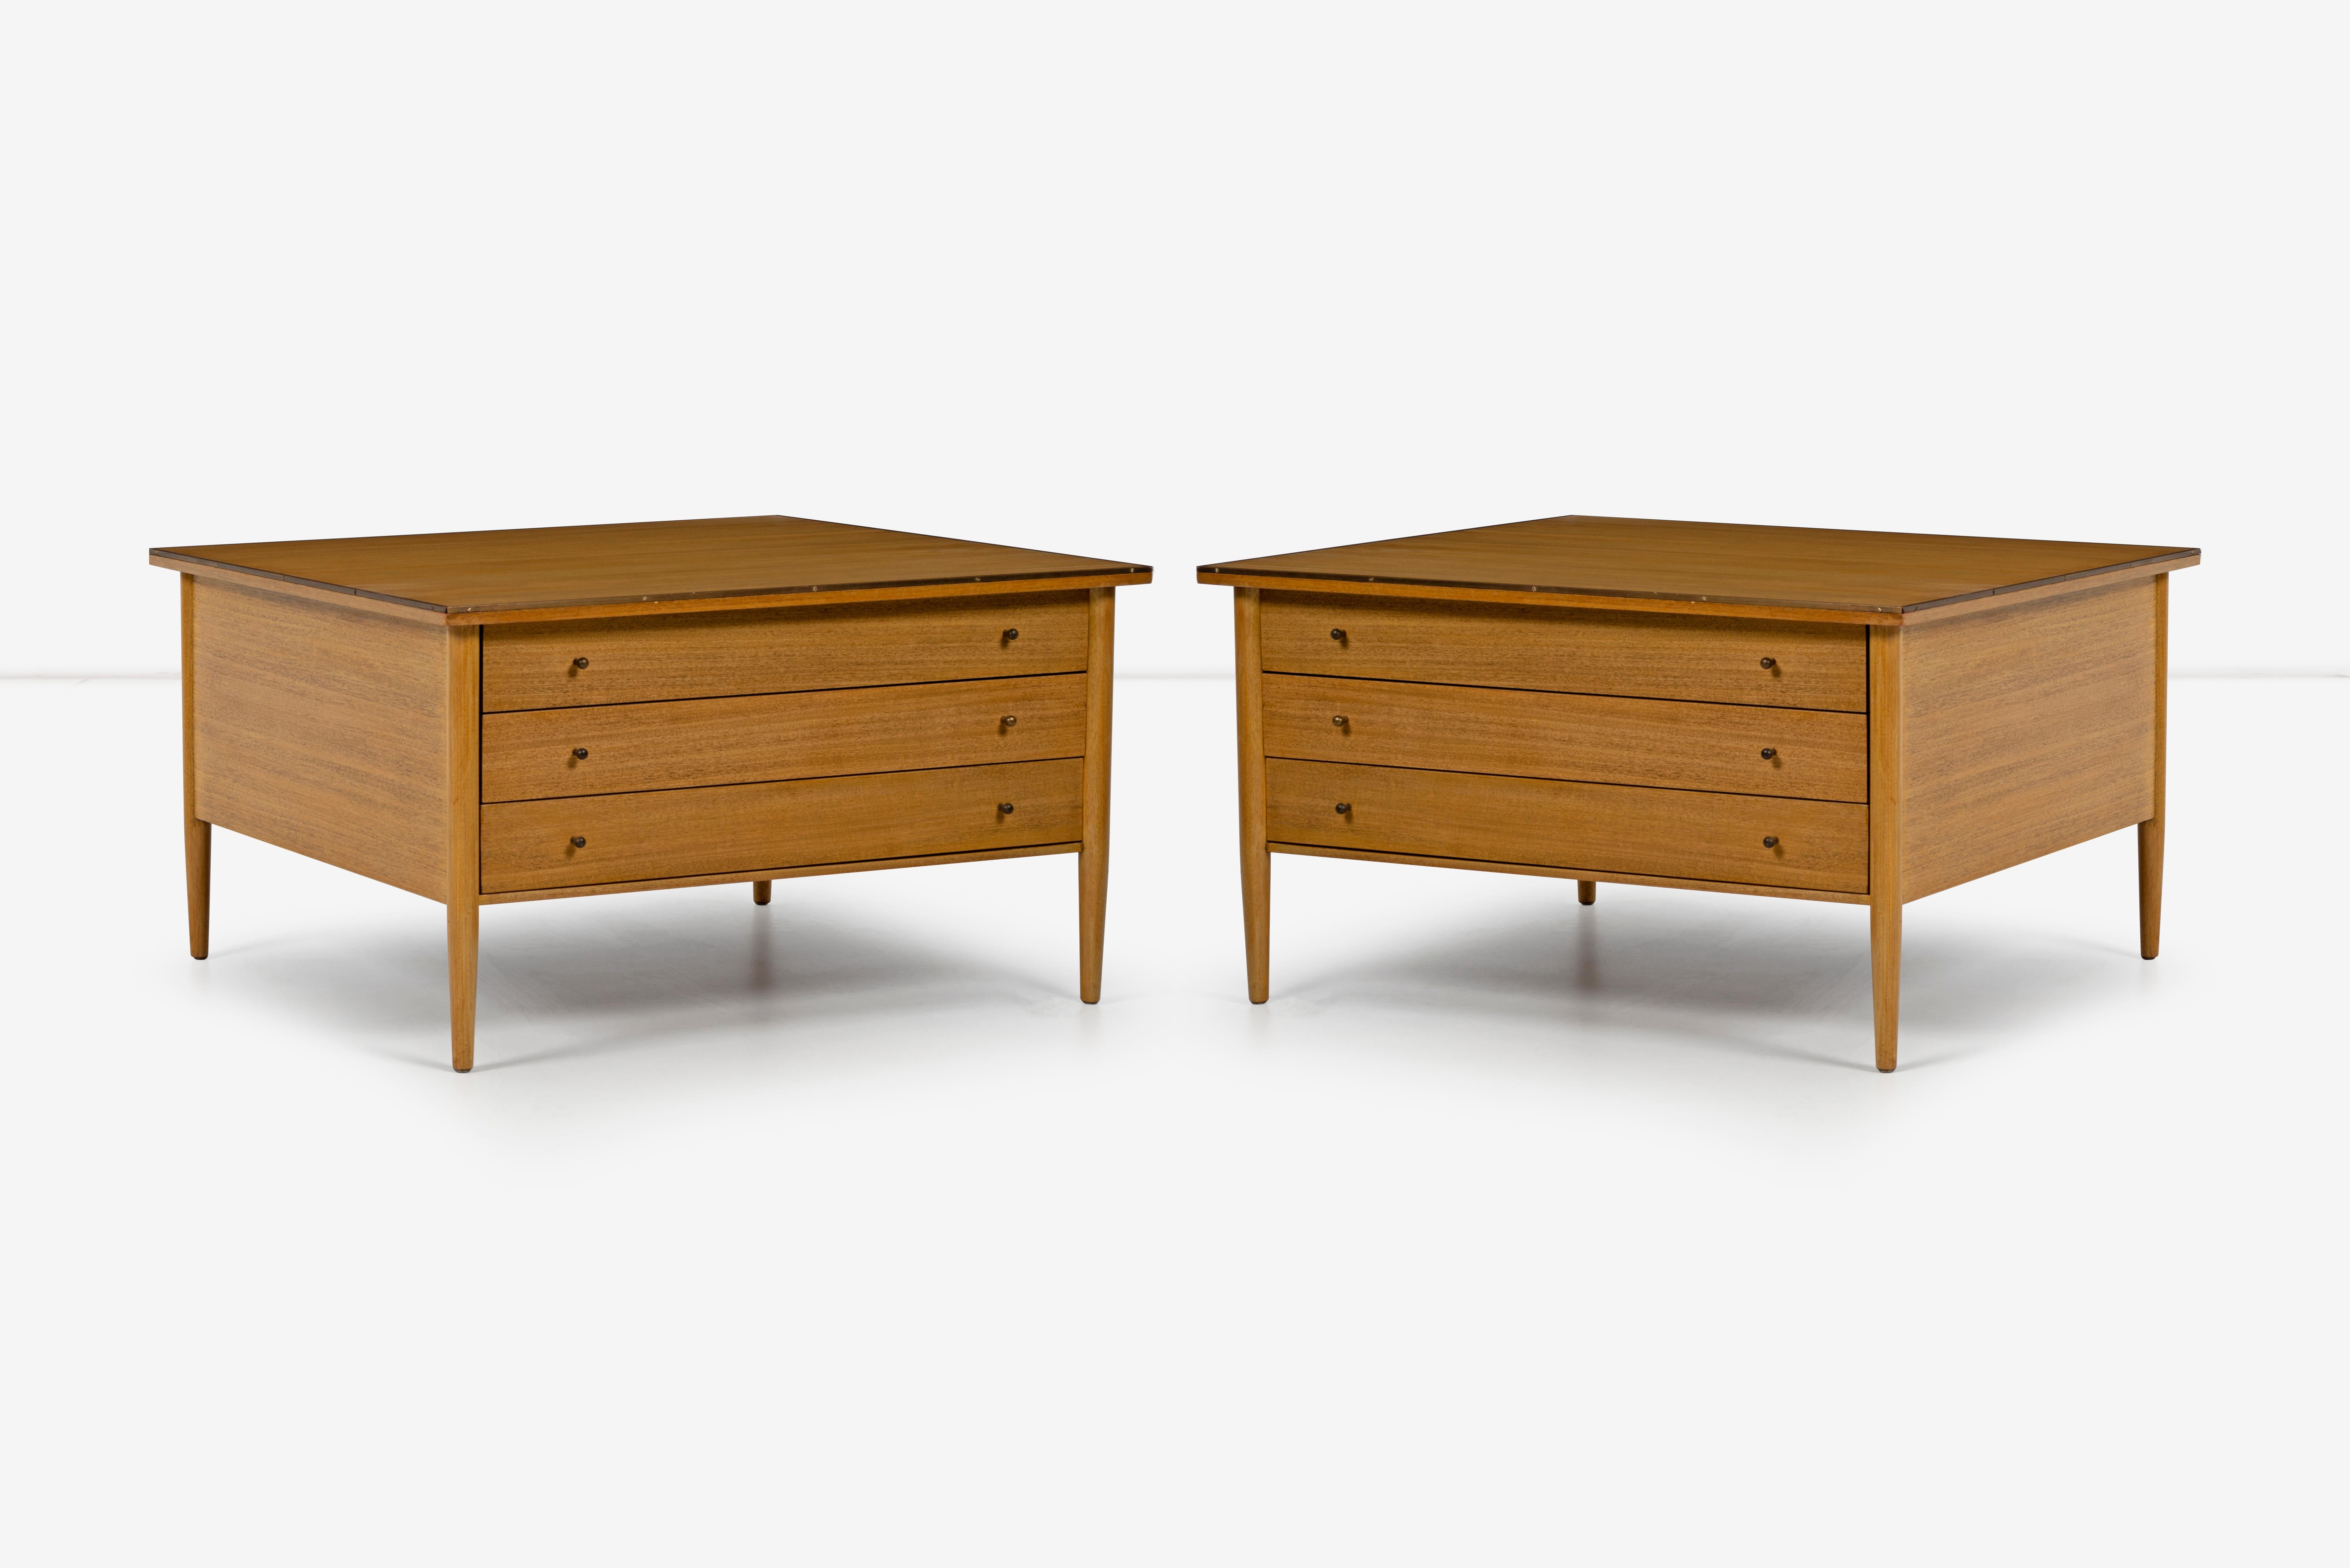 Paul McCobb for Calvin The Irwin Collection 3-drawer end tables or nightstands. Mahogany wood with solid tapered legs, brass pulls and edge trim.
[Label inside drawers: Paul McCobb, Calvin The Irwin Collection].